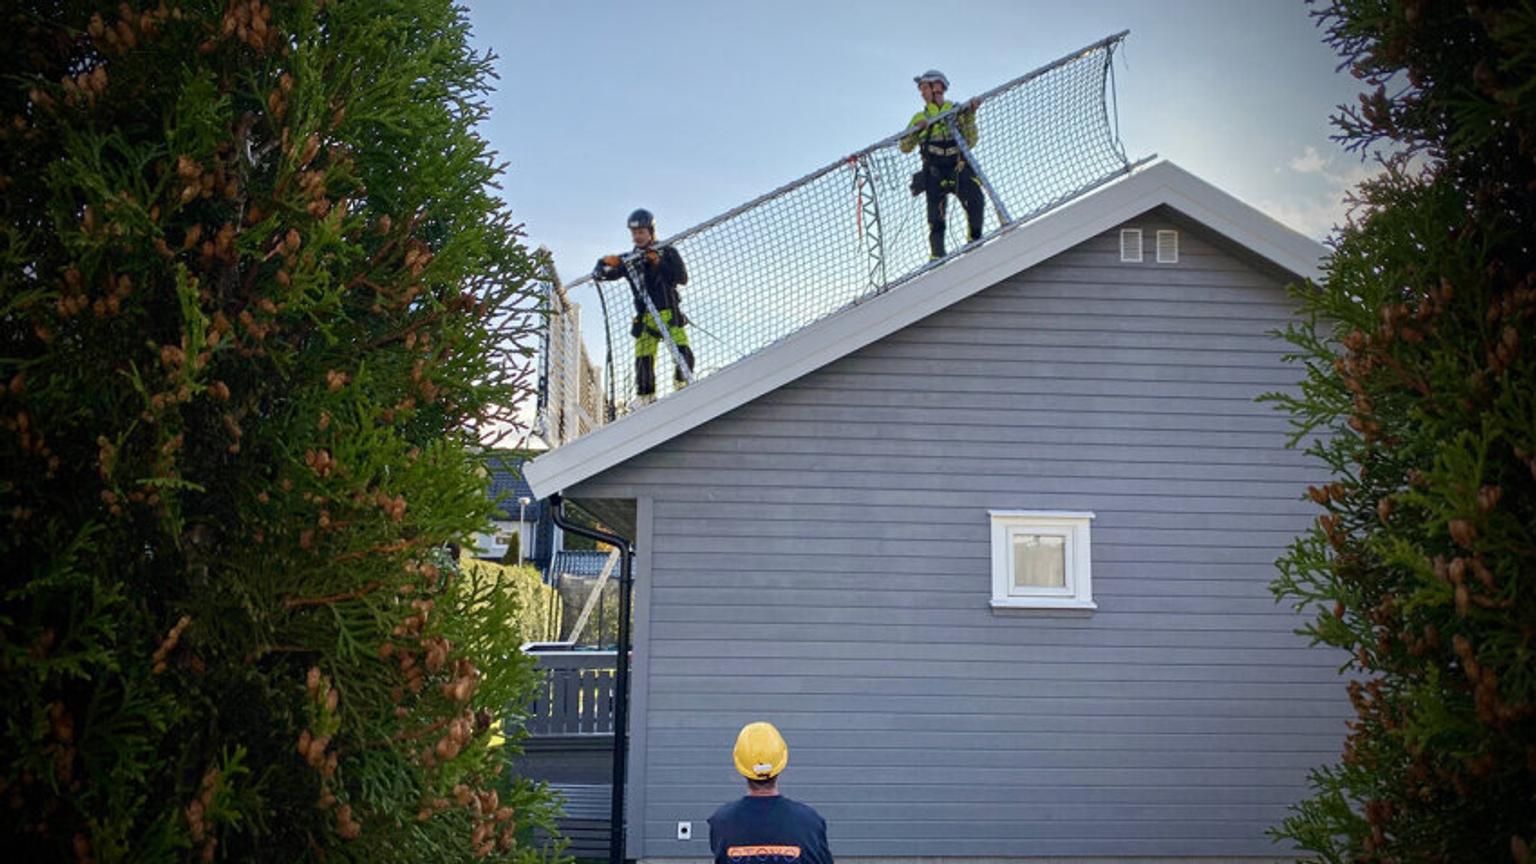 Workers standing on roof behind safety barrier